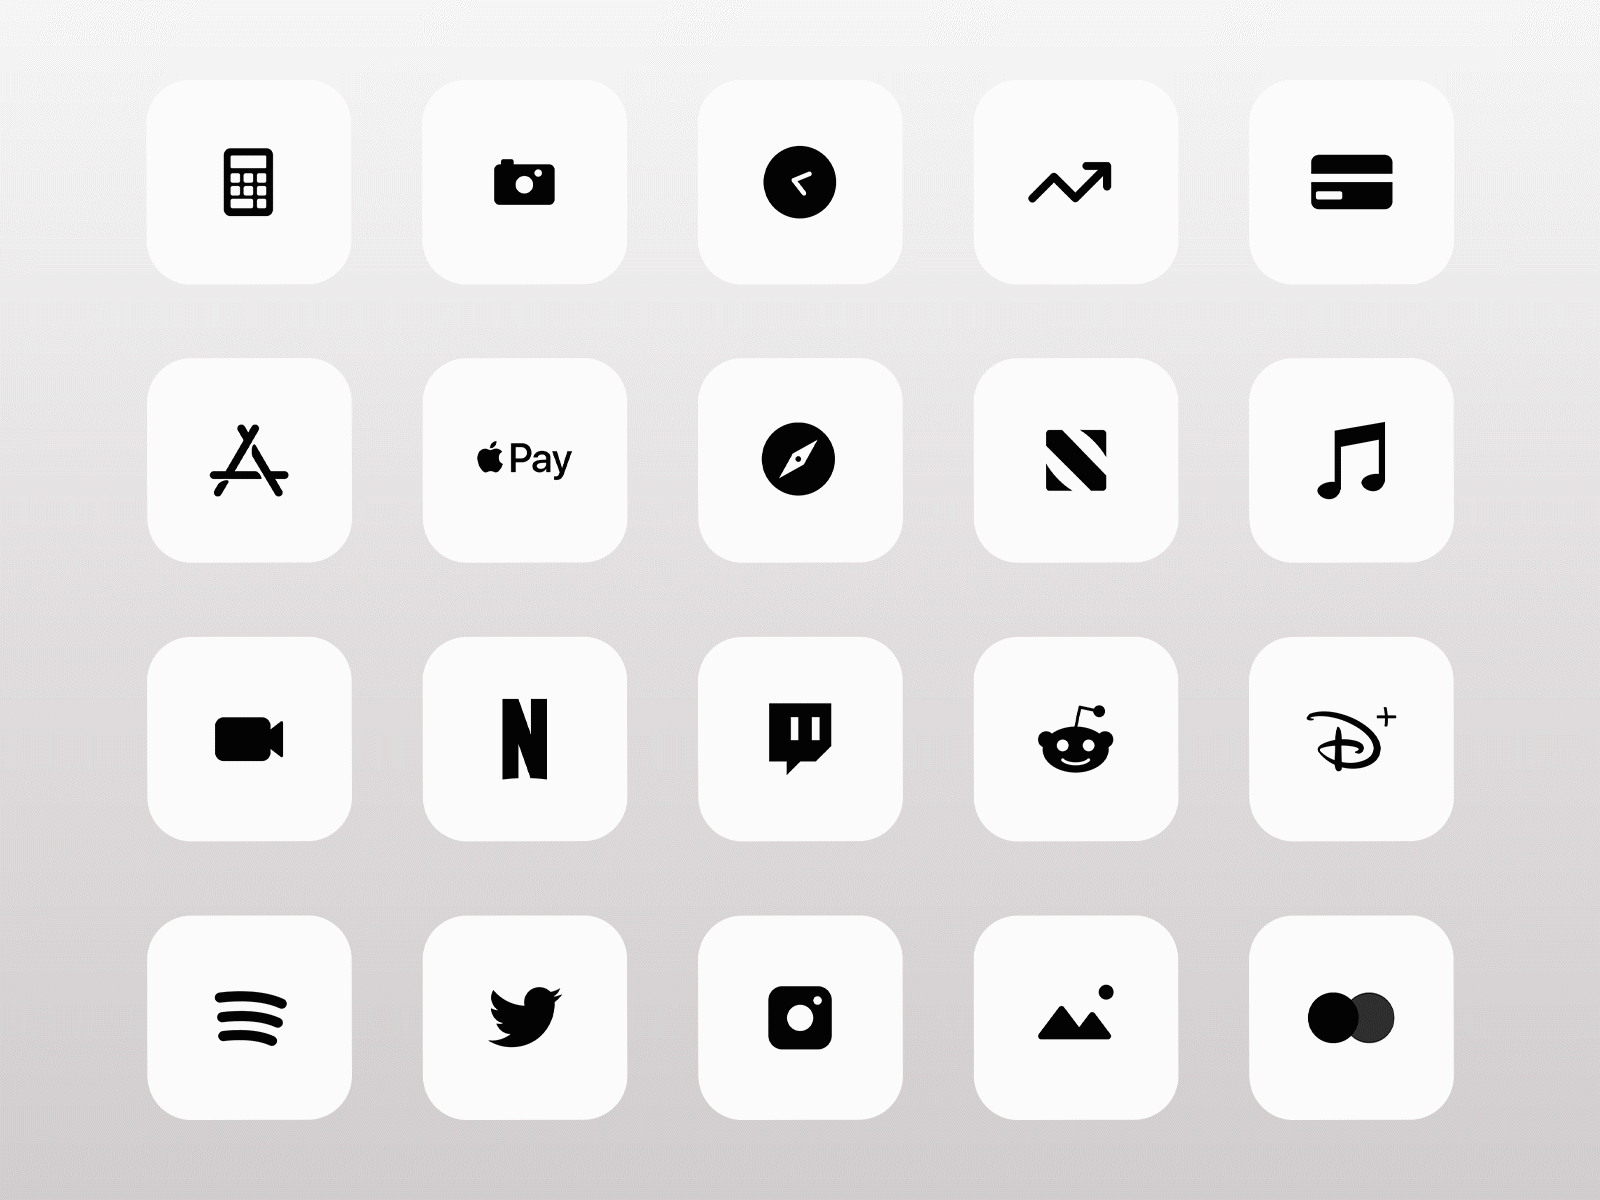 IOS 14 Minimalistic Icon Pack for sale icons icons pack iconset iconsets minimal minimalism minimalist modern